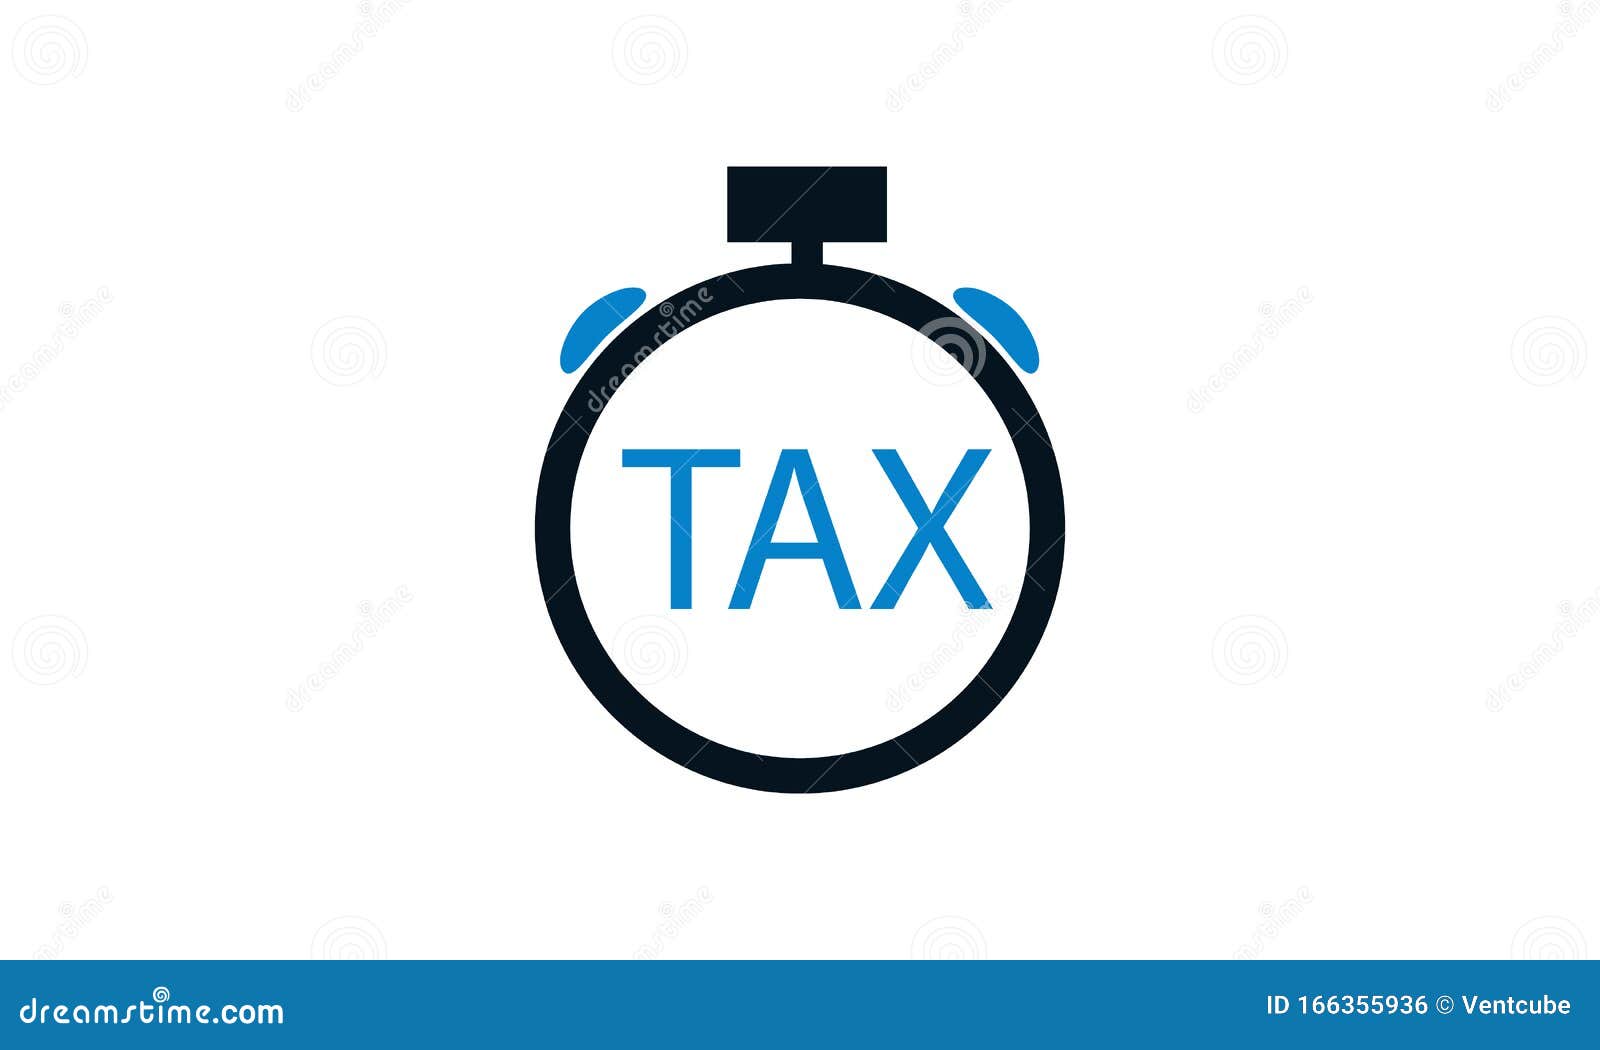 tax-refund-time-icon-simple-illustration-of-tax-refund-time-icon-for